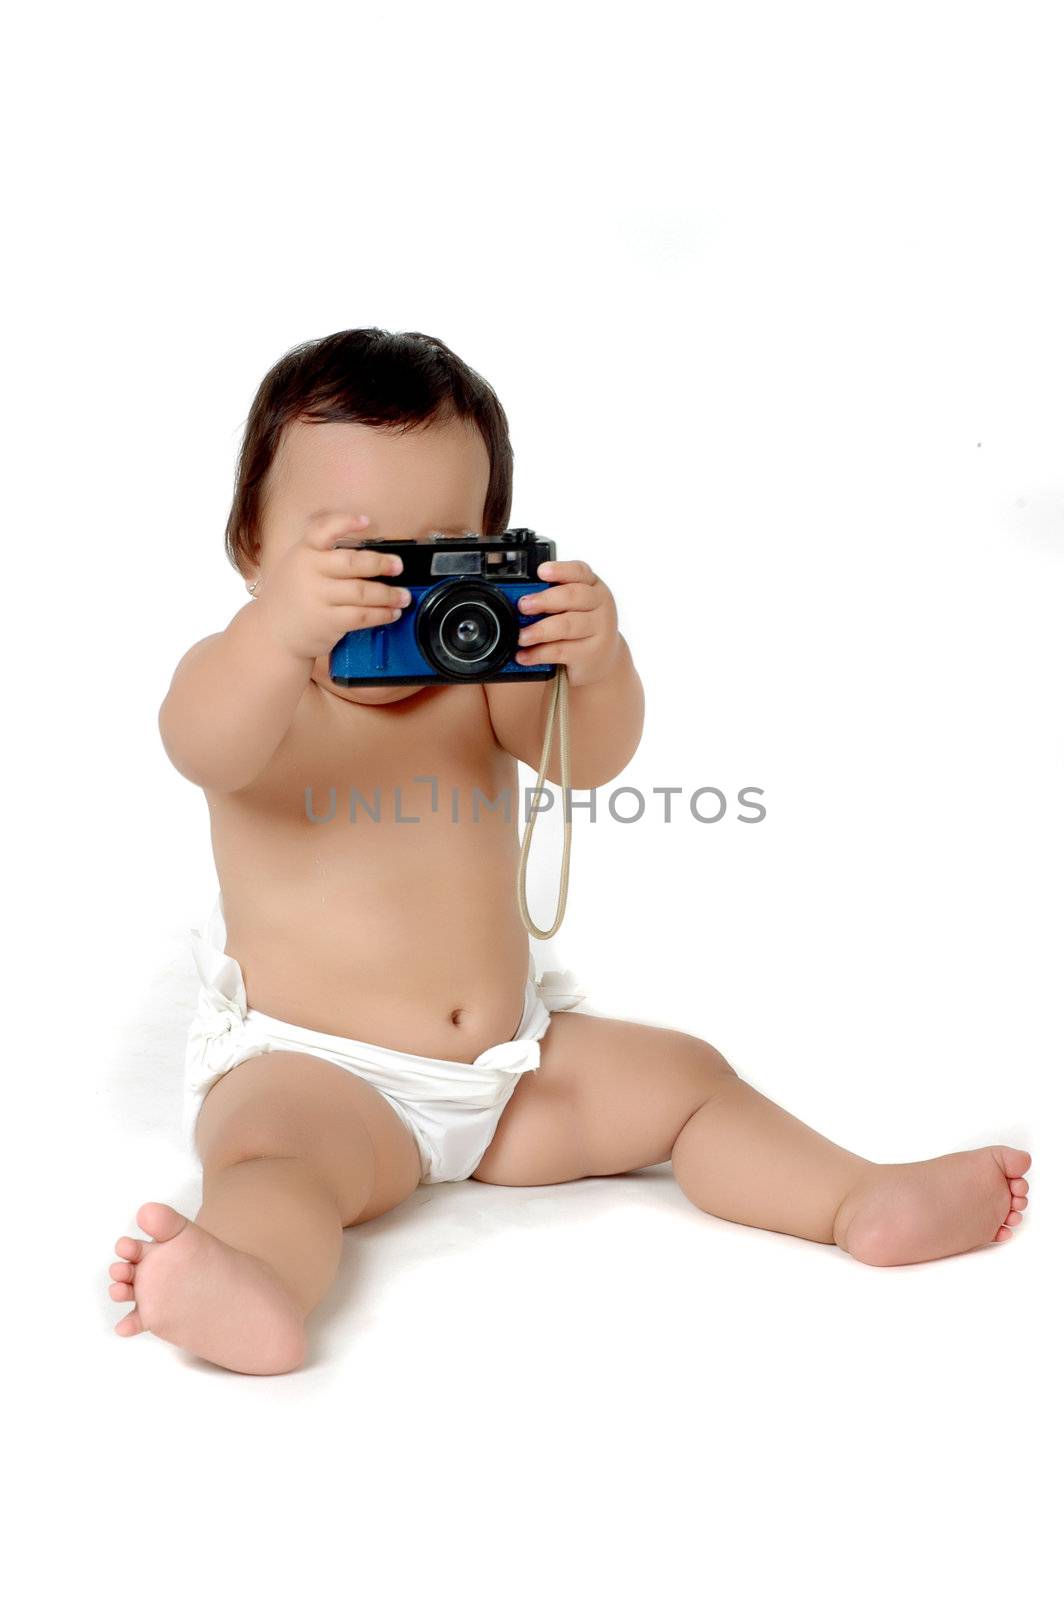 a chubby little  girl photograph with vintage camera isolated on white background